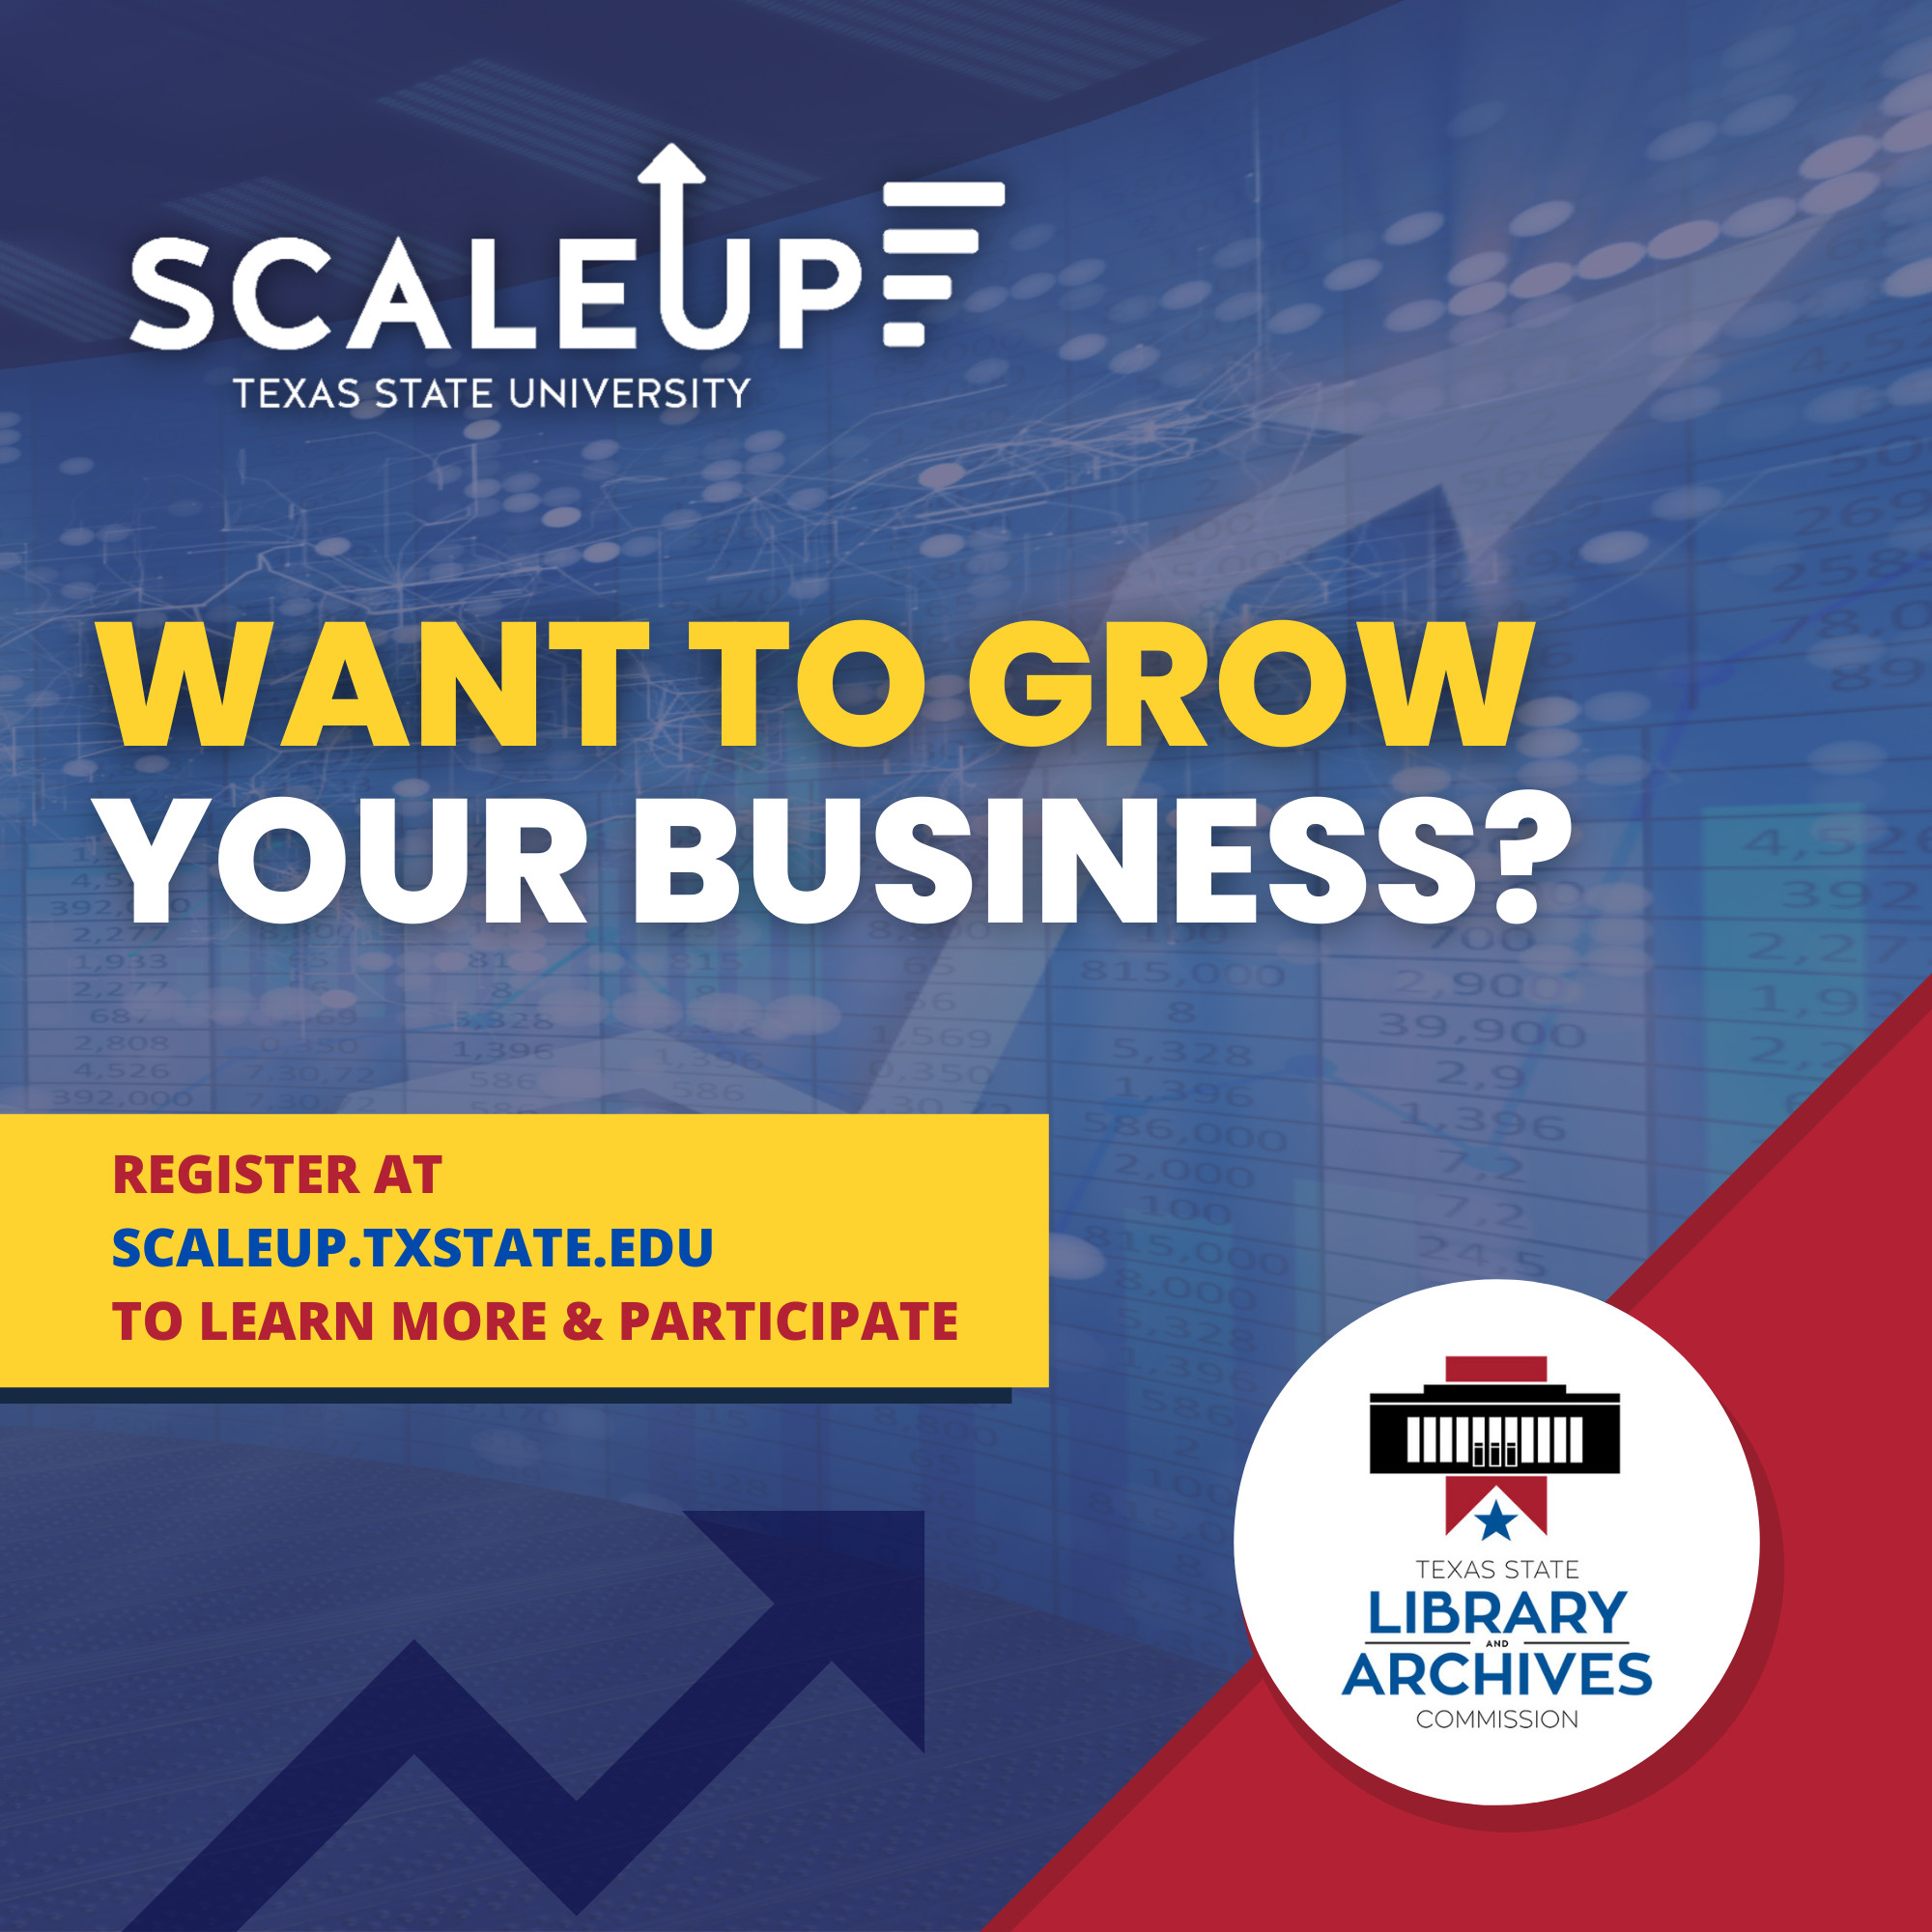 Advertisement in Spanish for the SCALEUP program at Texas State University